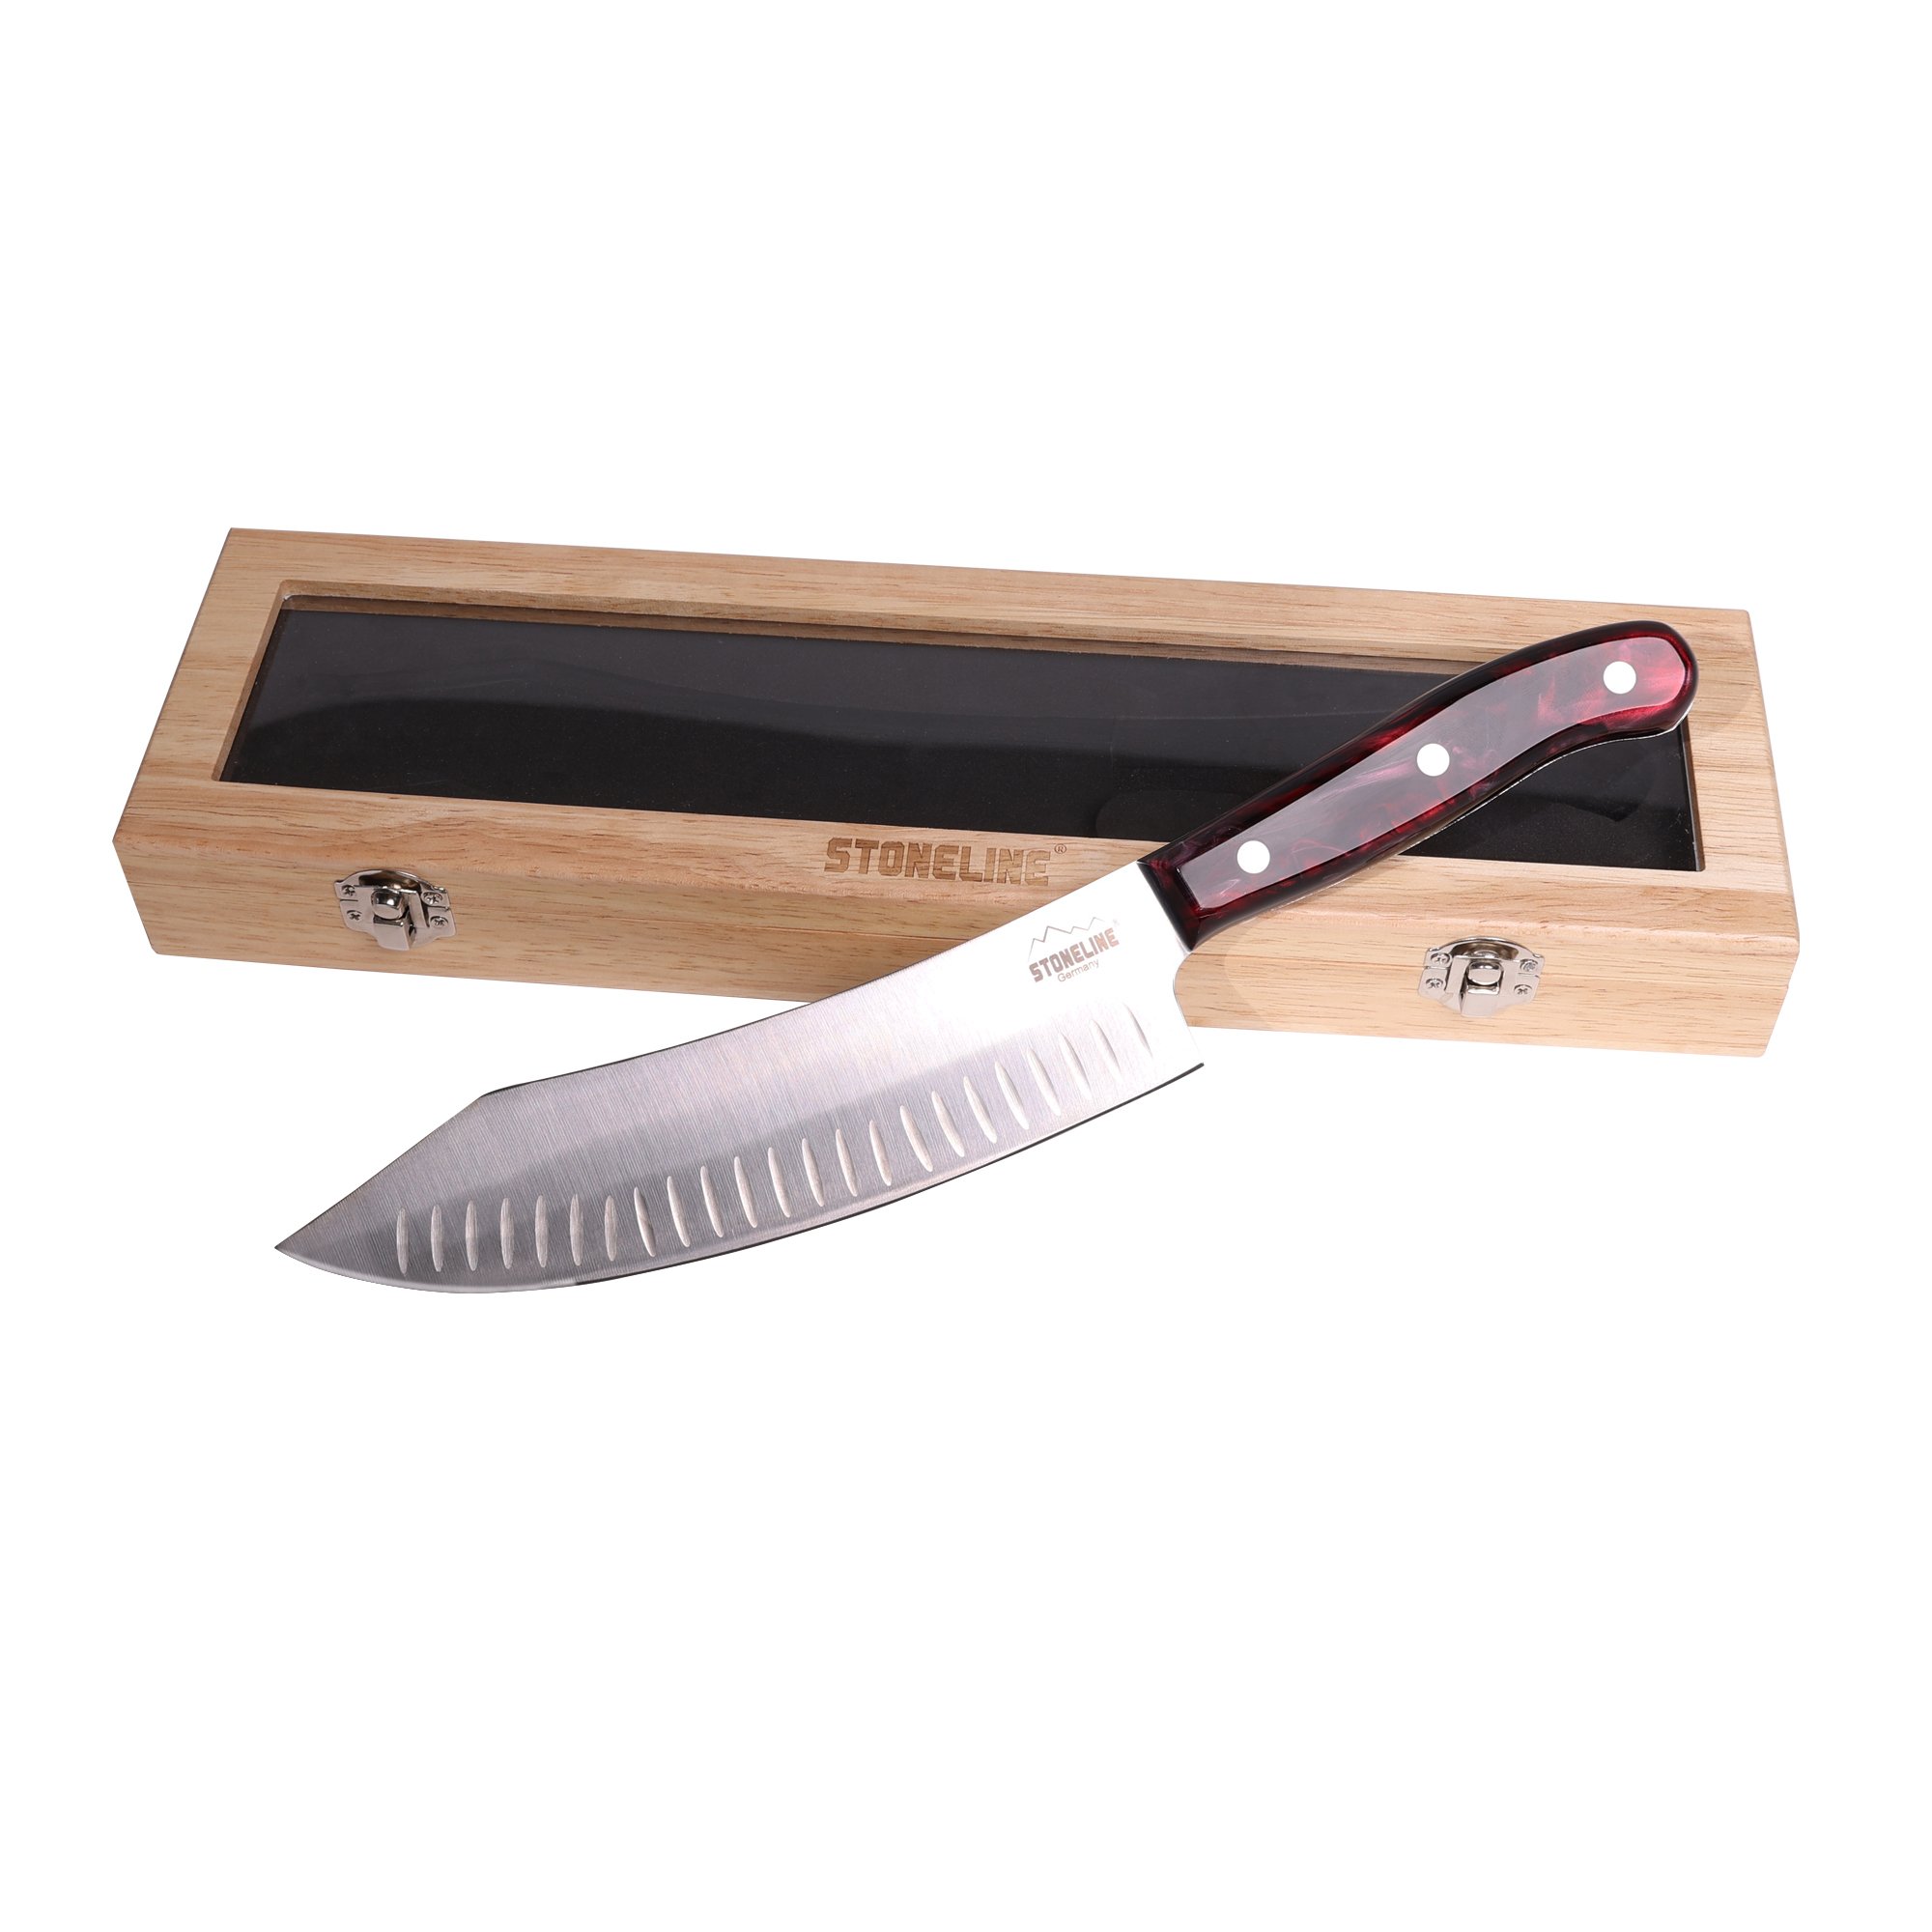 STONELINE® Stainless Steel Chef's Knife 33.2 cm, Hollow Edge, Wooden Storage Box